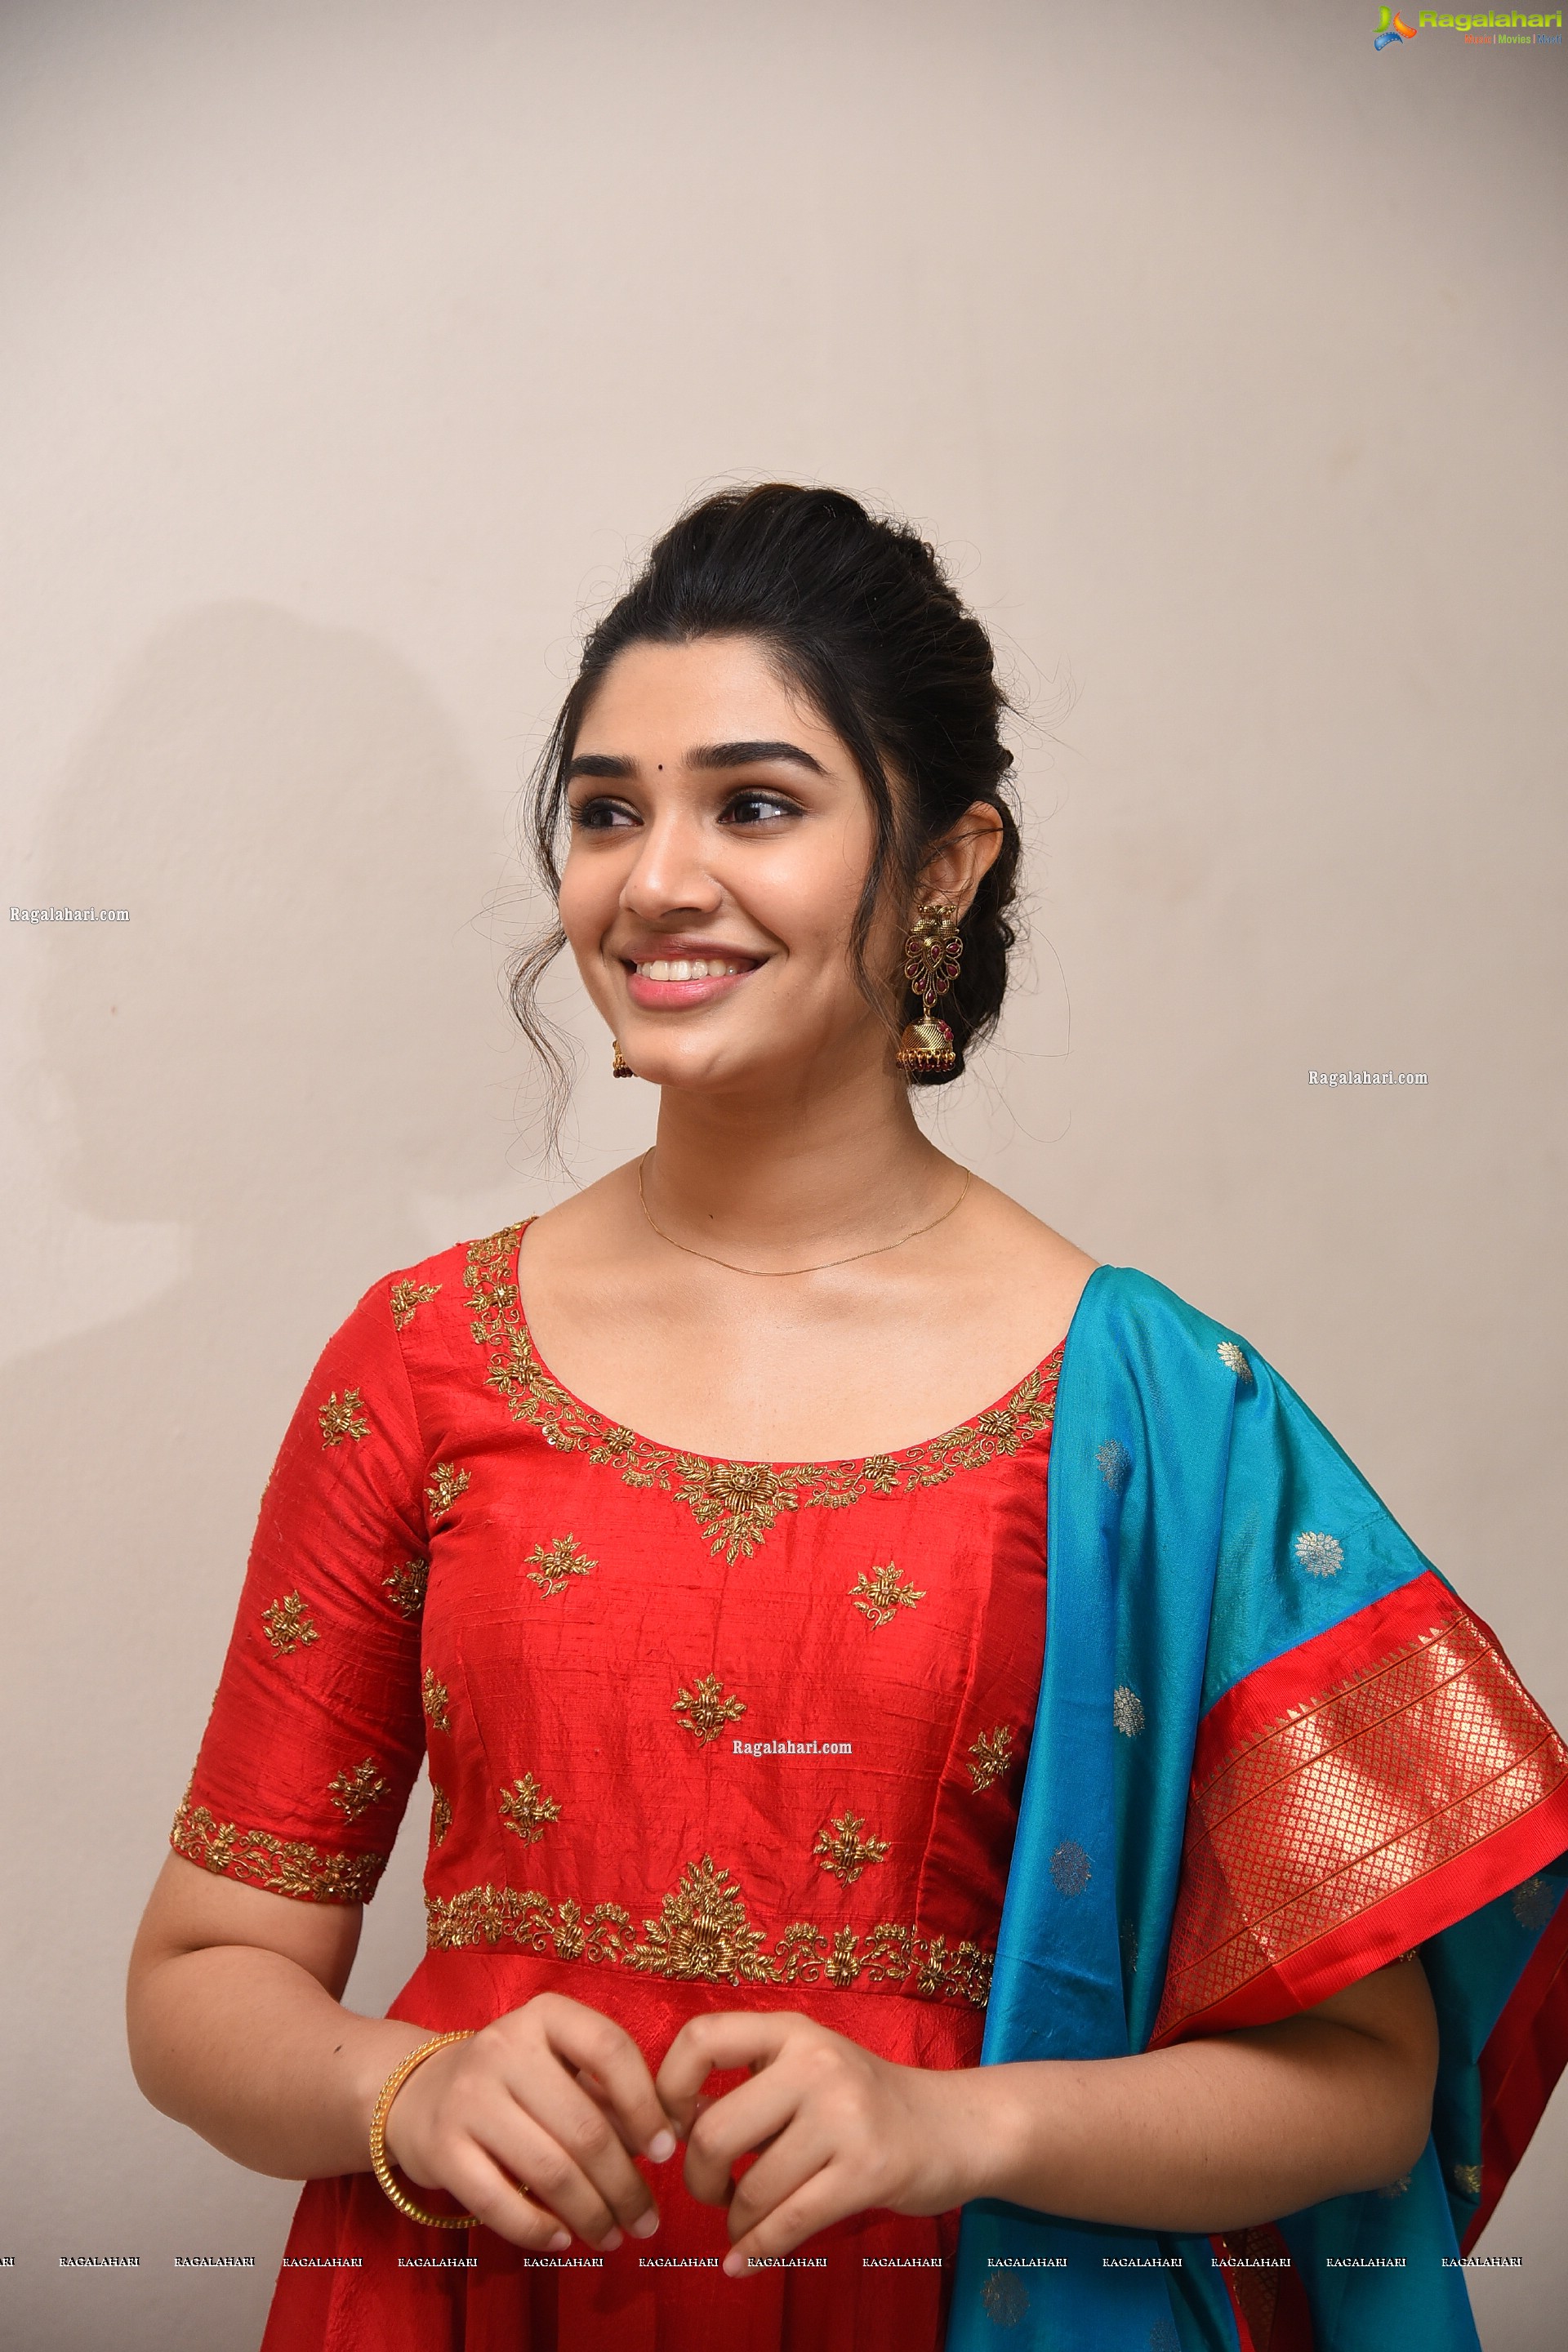 Krithi Shetty at Uppena Movie Success Meet, HD Photo Gallery